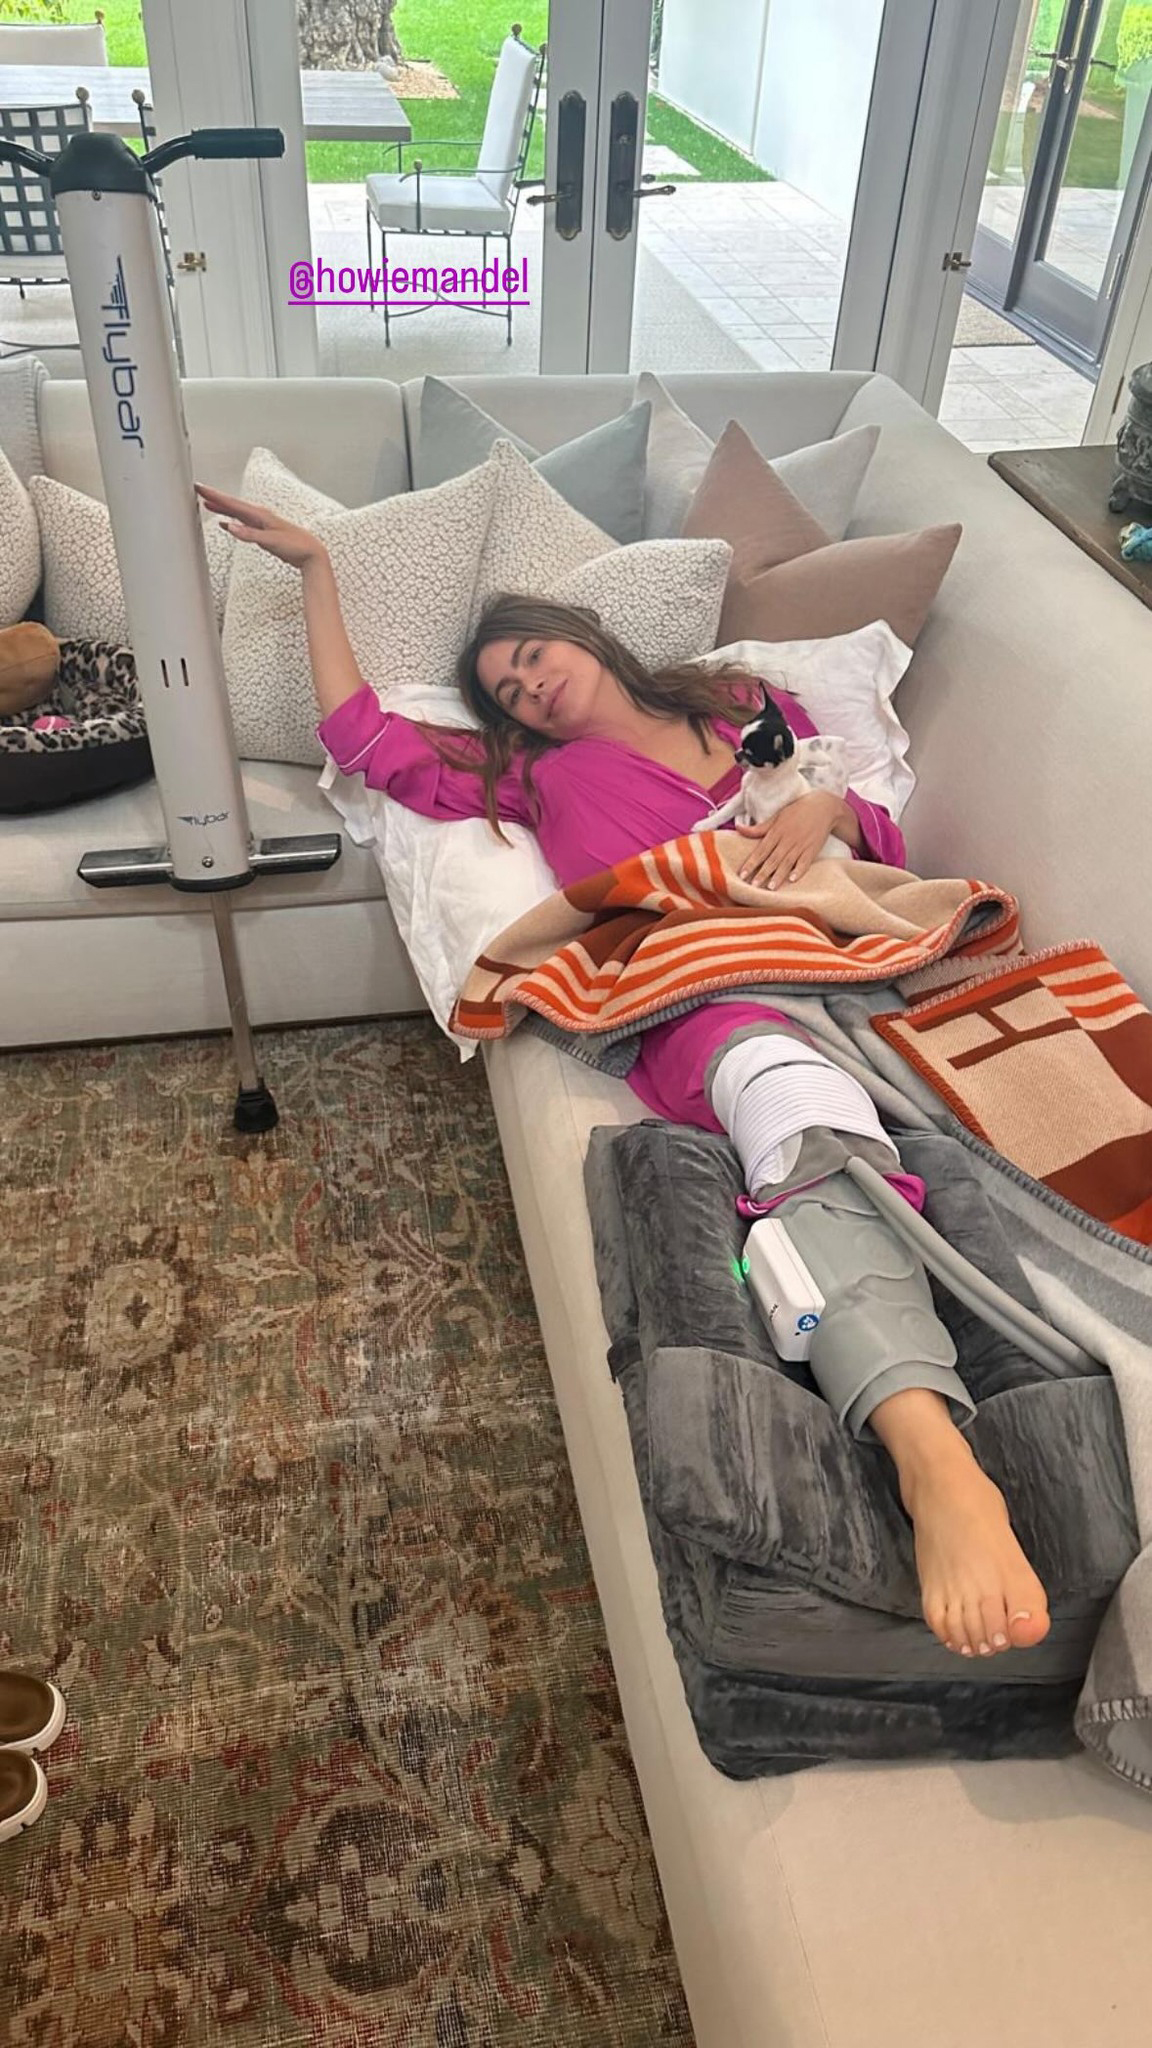 Sofia revealed she was resting after a major procedure last month